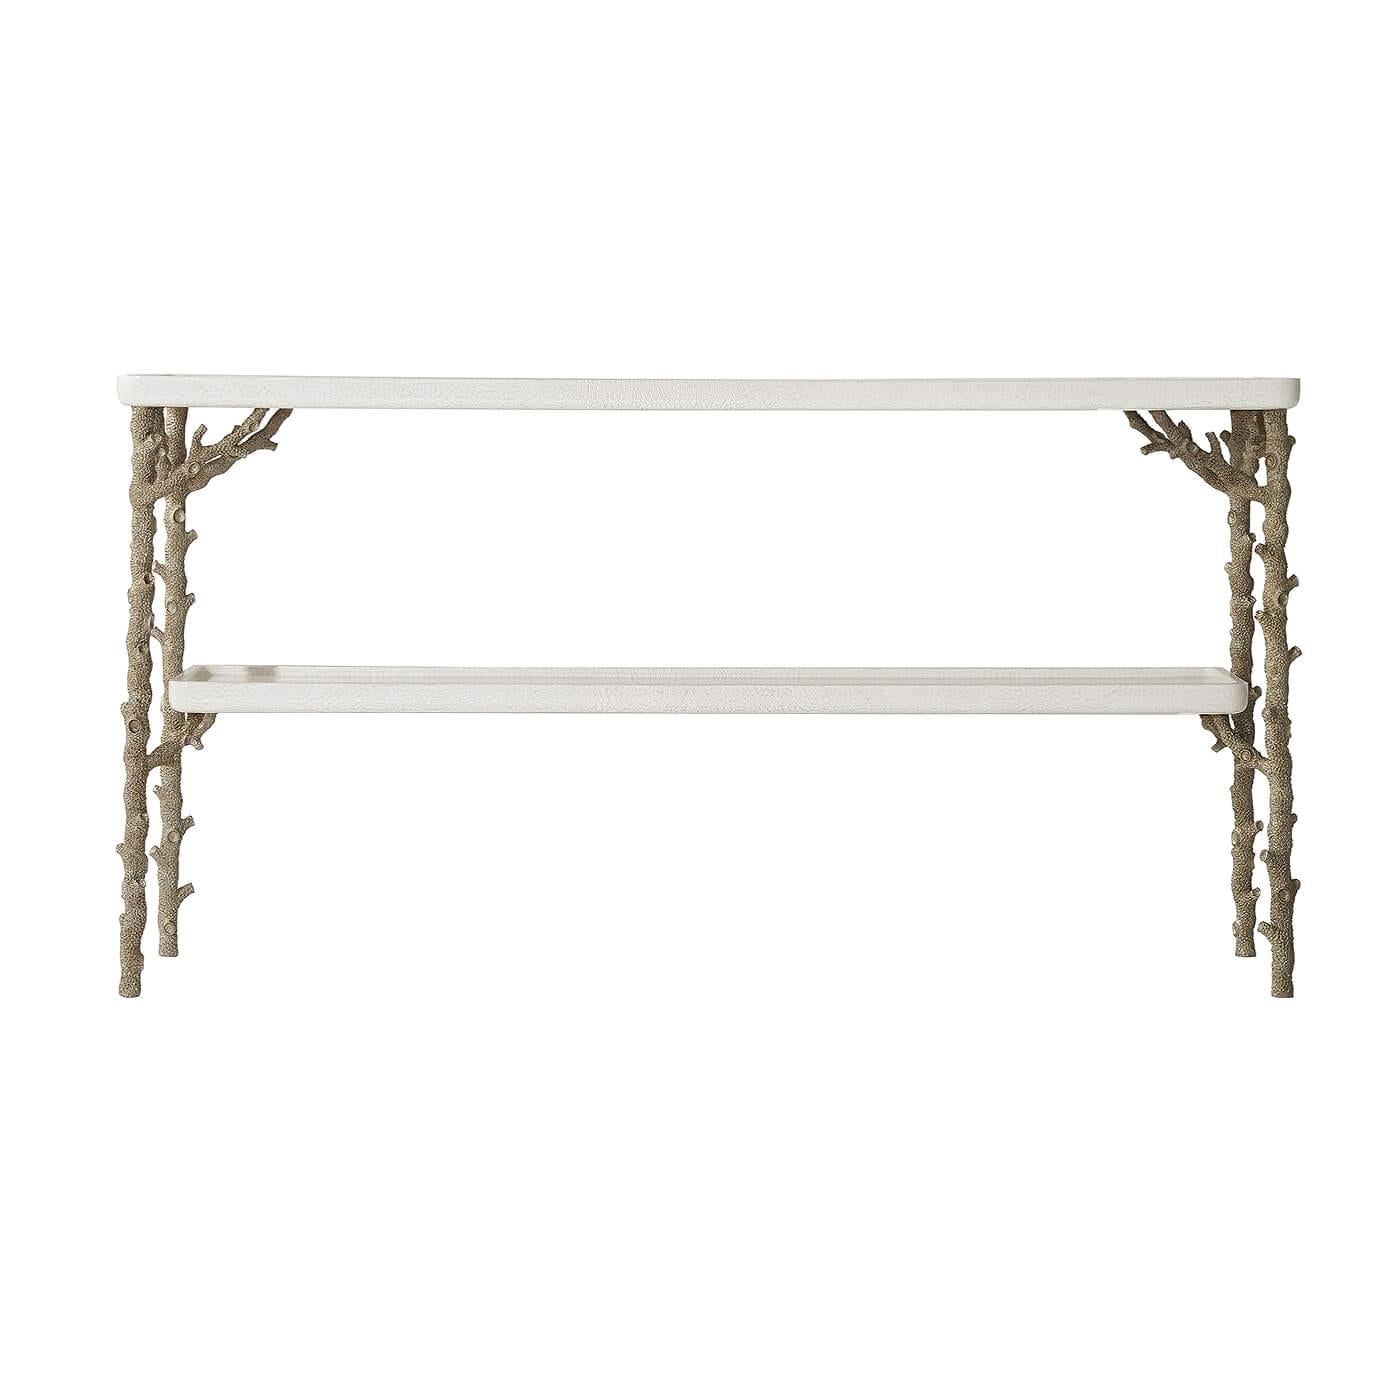 Modern mottled white eggshell inlaid tray top and undertier with champagne finished textured coral cast aluminum legs.
Dimensions: 62